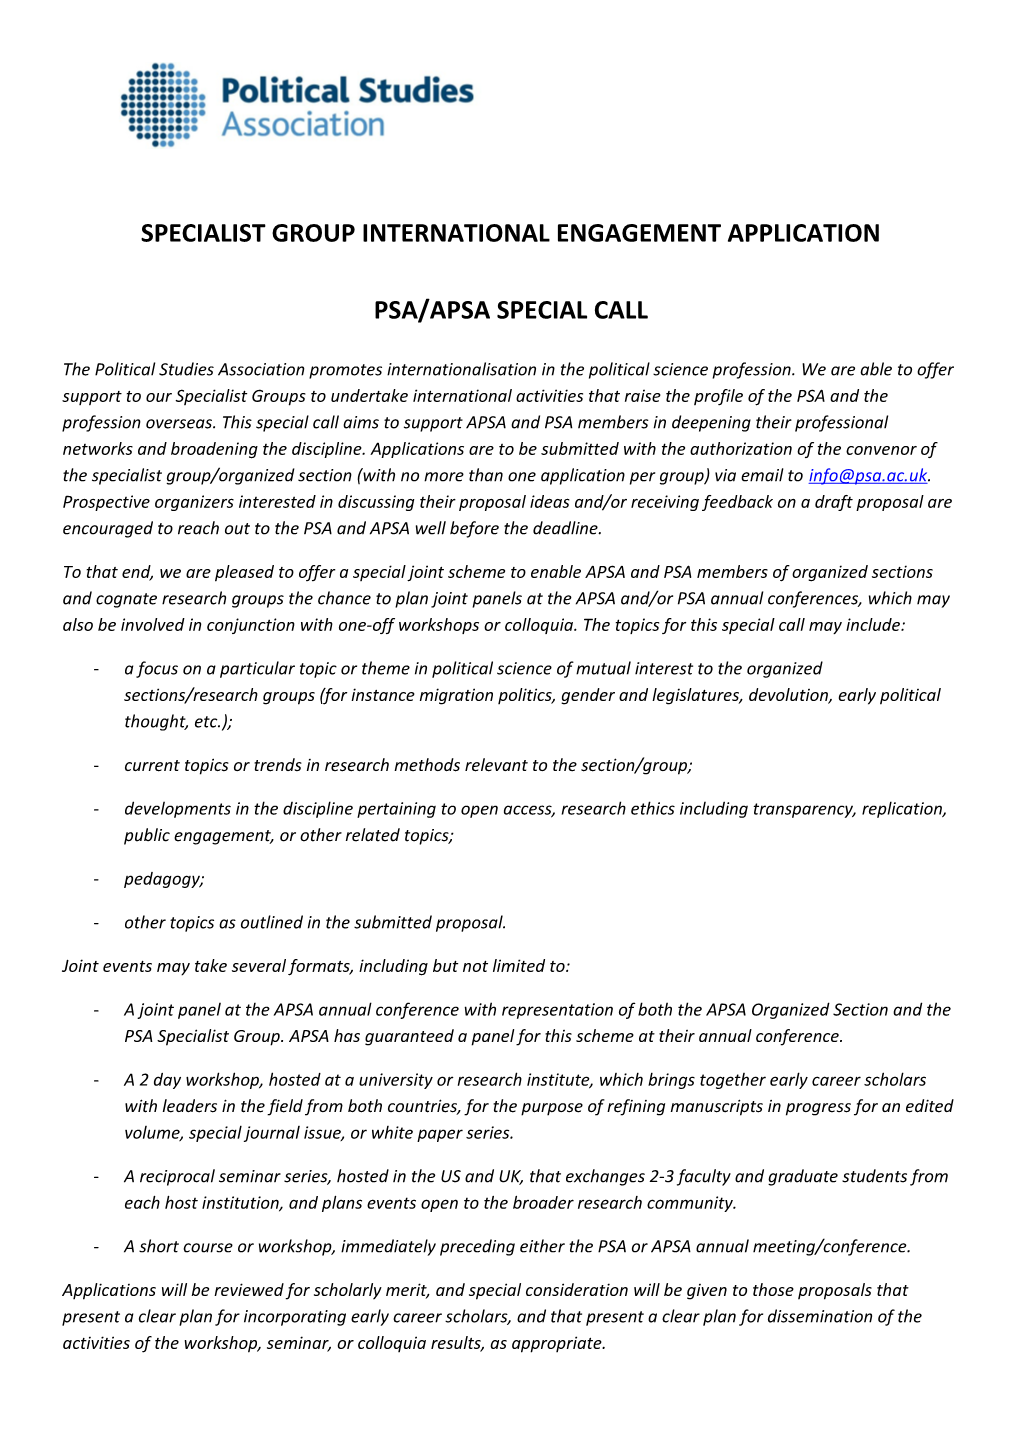 Specialist Group International Engagement Application